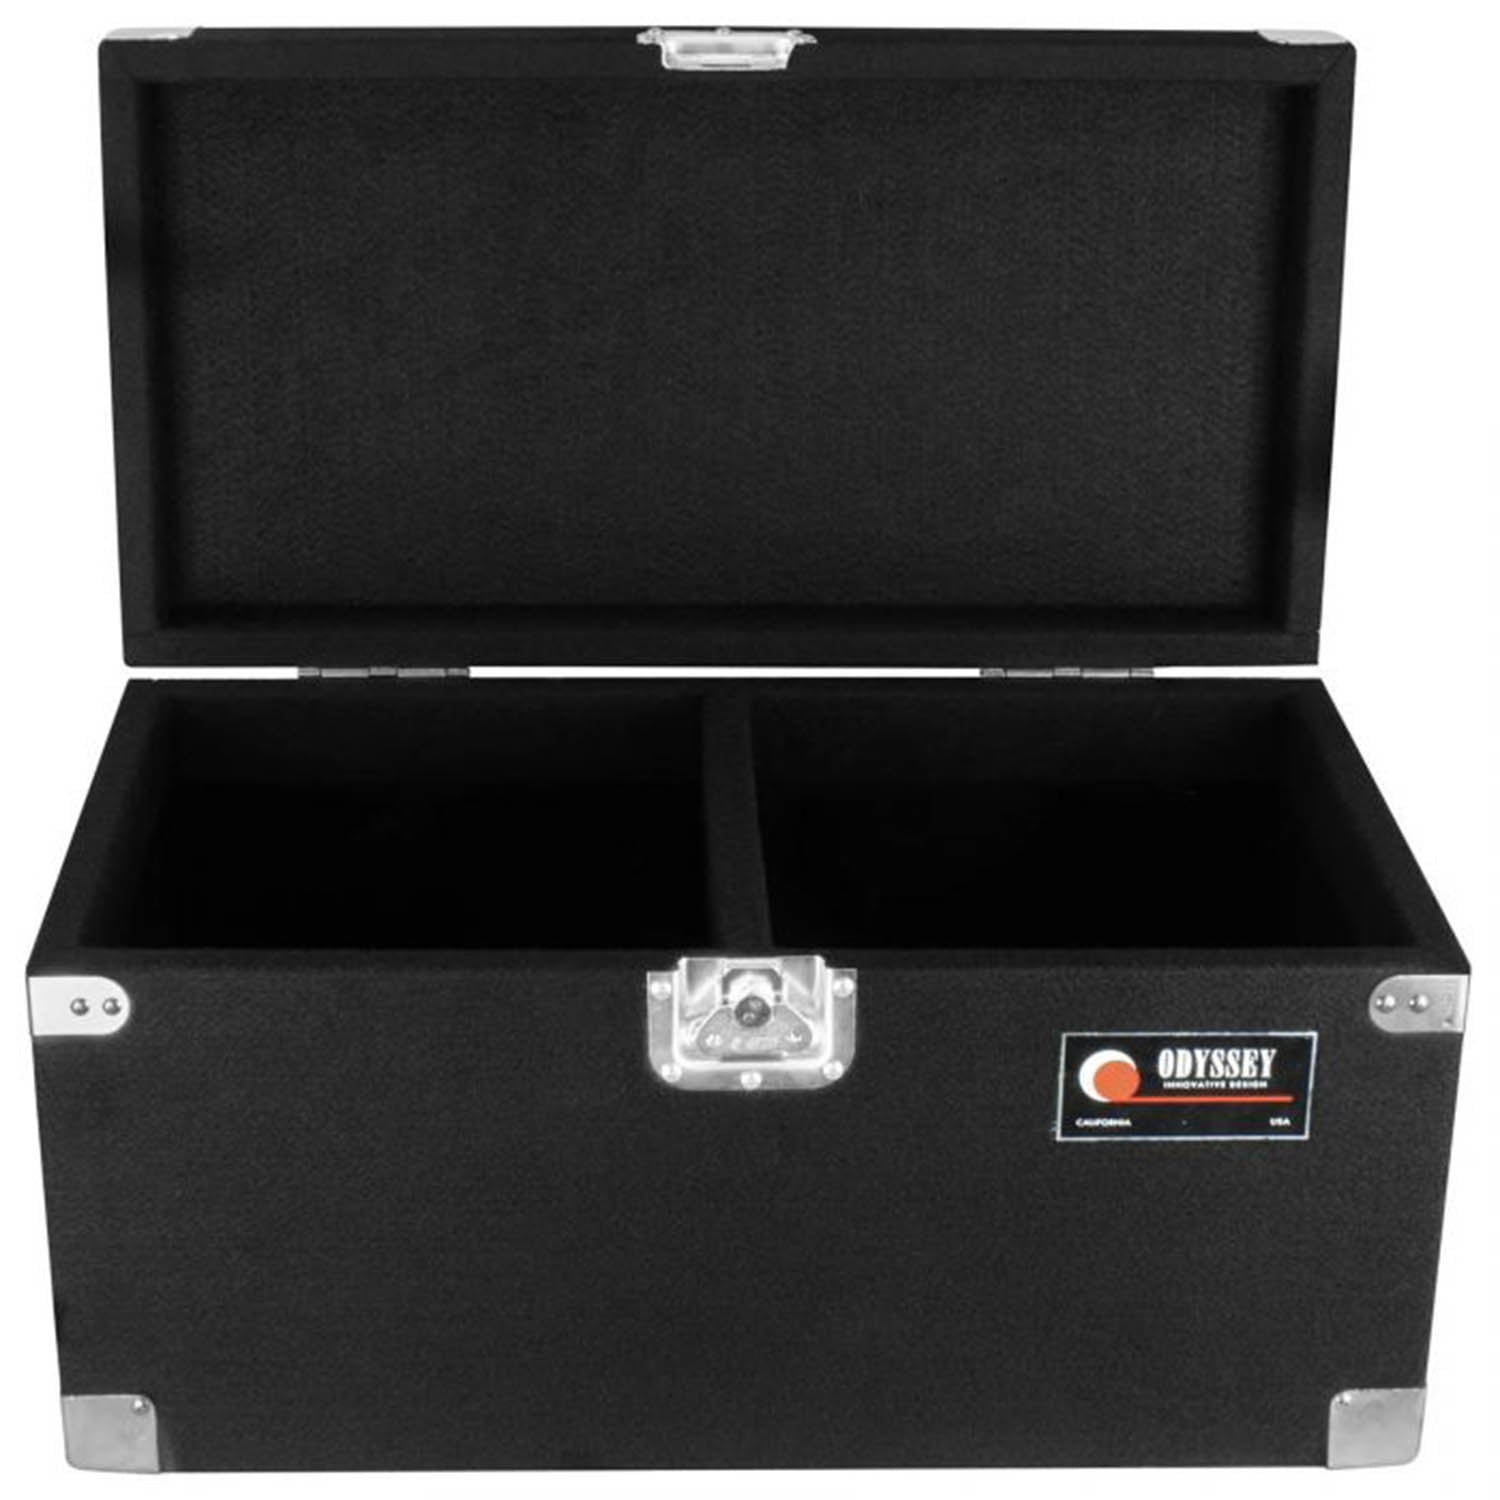 Odyssey CLP200P, Pro Record/Utility Carpet Case For 200 Vinyl Records/LPs - Hollywood DJ